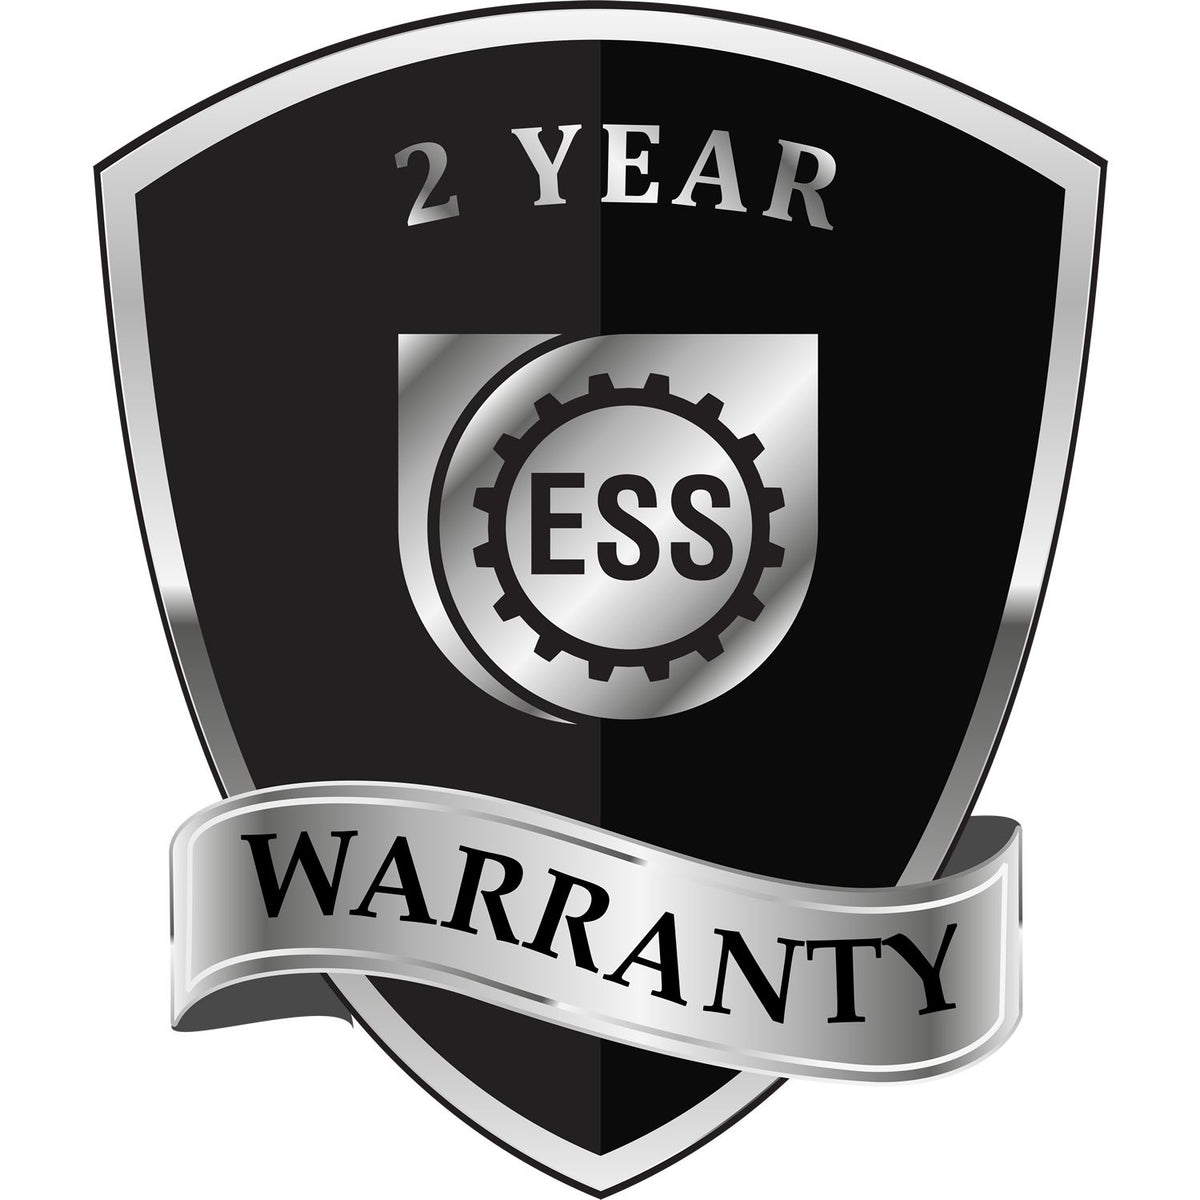 A badge or emblem showing a warranty icon for the Extended Long Reach Kansas Surveyor Embosser